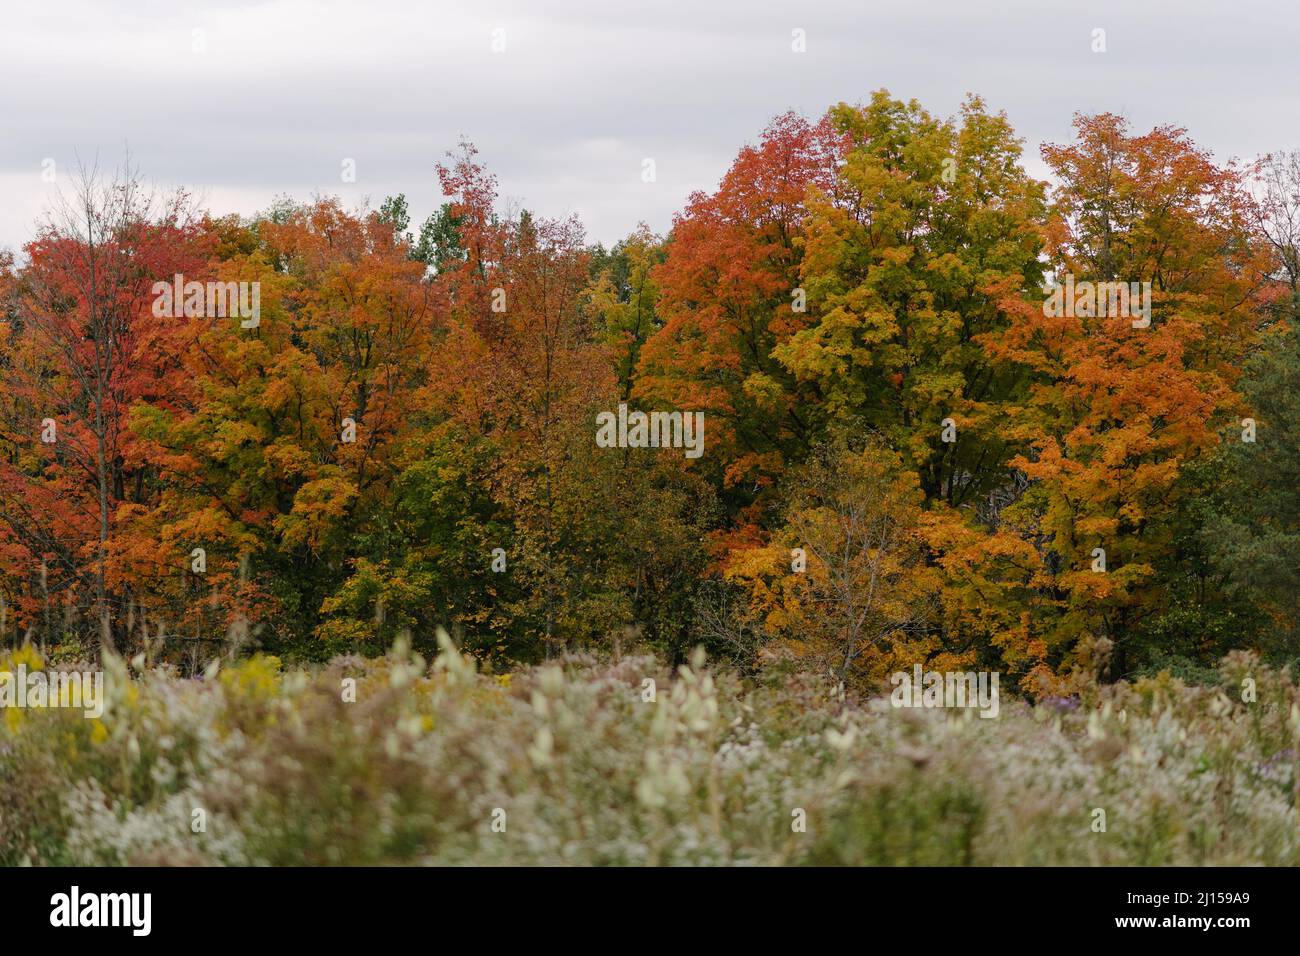 Fall colours pictured in a Bolton, Ontario, Canada field in October of 2020. Stock Photo